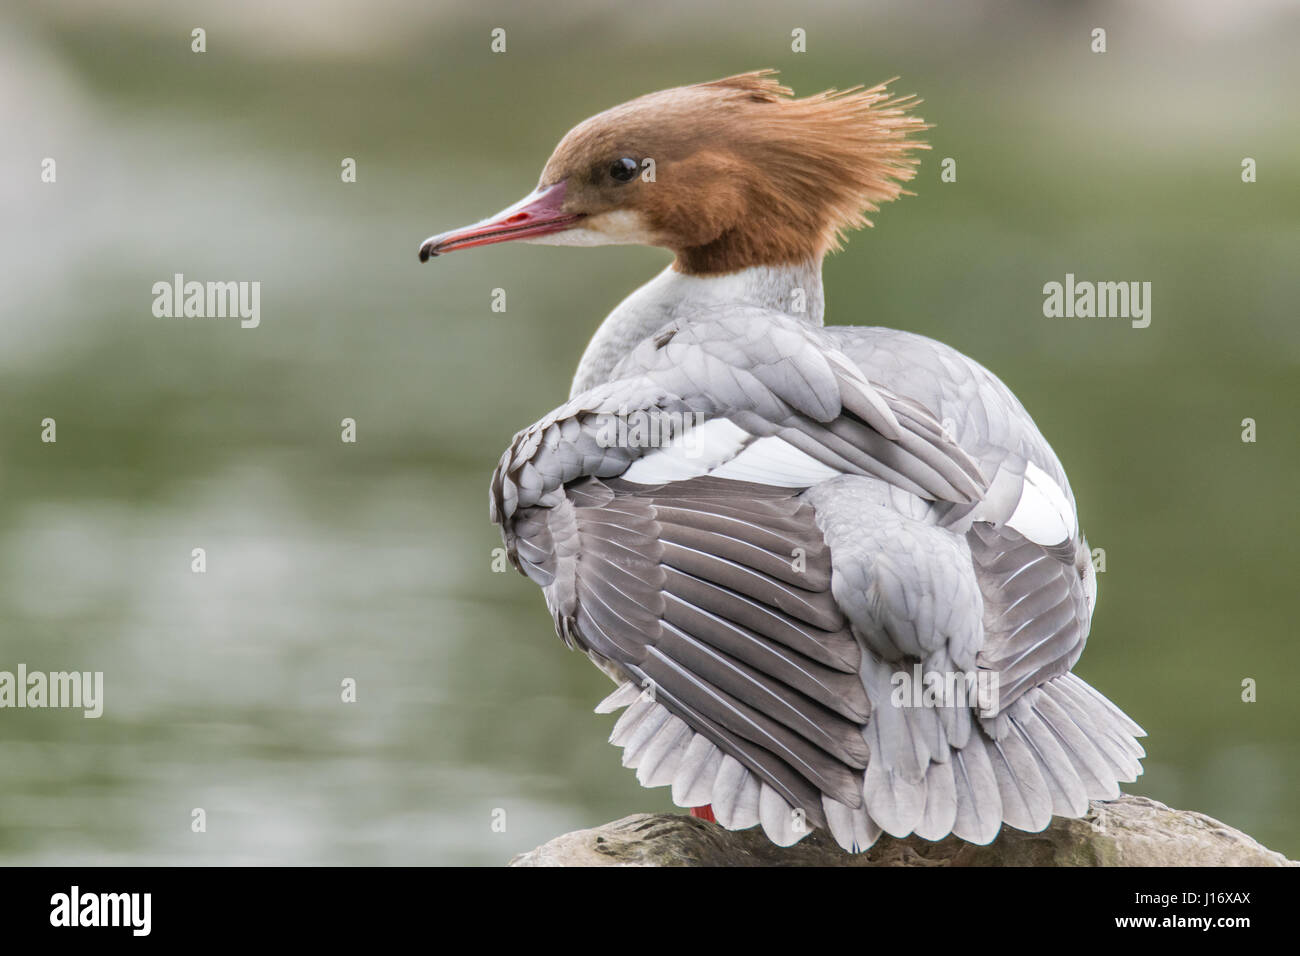 Goosander (Mergus merganser) female showing crest. Sawbill duck in the family Anatidae, with crest and serated bill, on the River Taff, Cardiff, UK Stock Photo